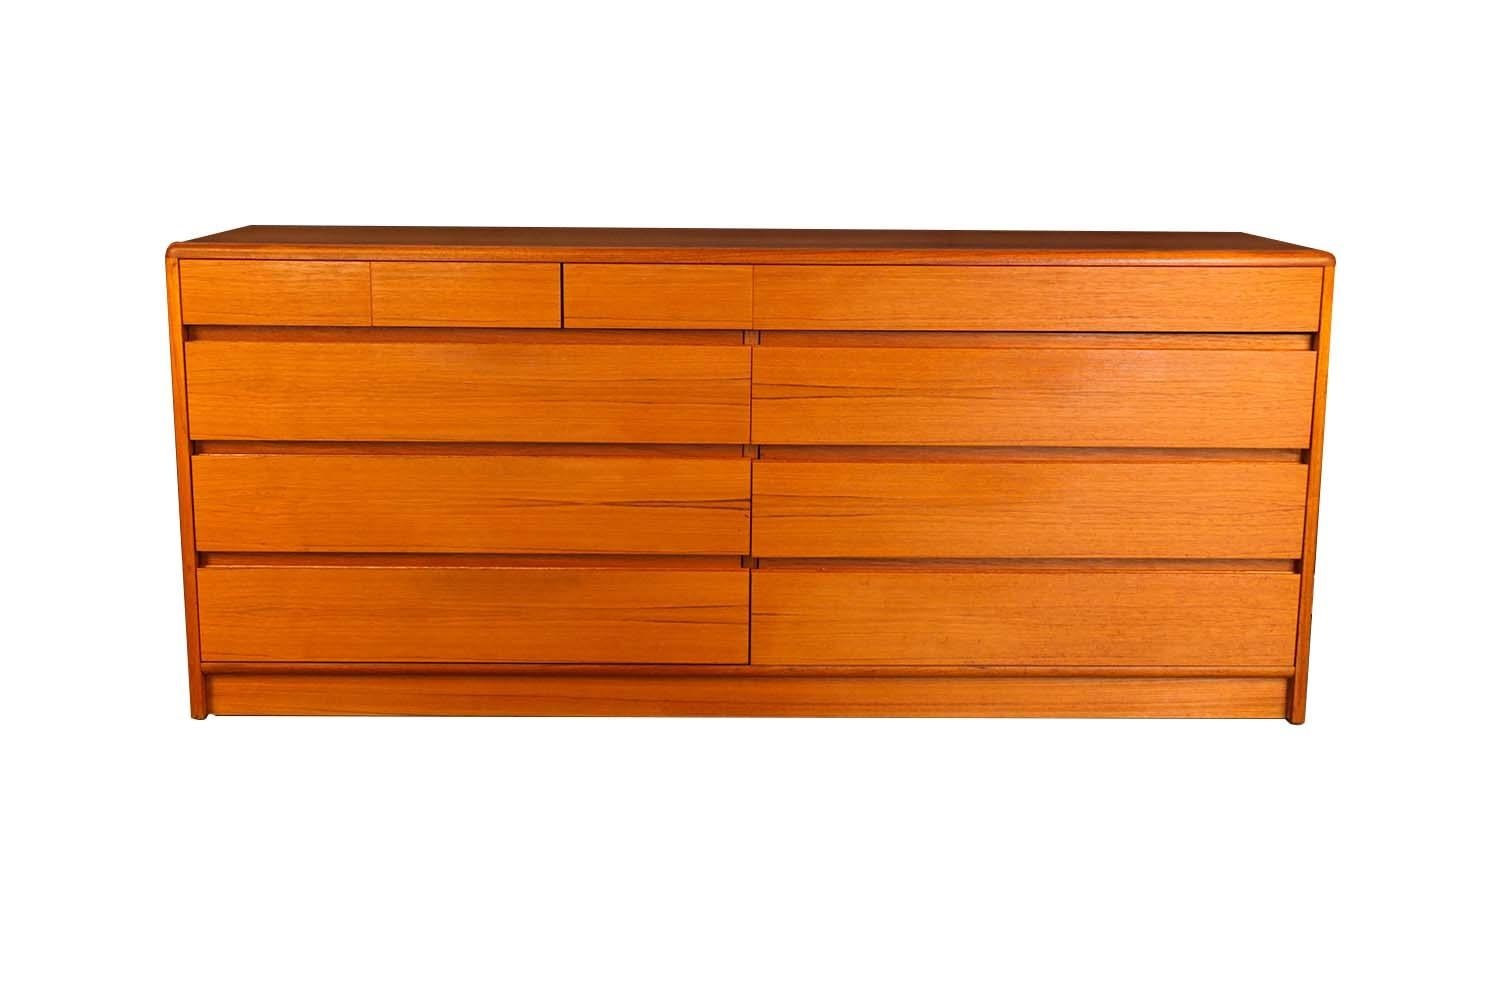 A minimalistic teak double dresser by Nordisk Andels-Eksport. This Danish Mid-Century Modern teak double dresser with ten drawers is Minimalist in style. This simply elegant dresser features an asymmetric drawer arrangement with three small lingerie